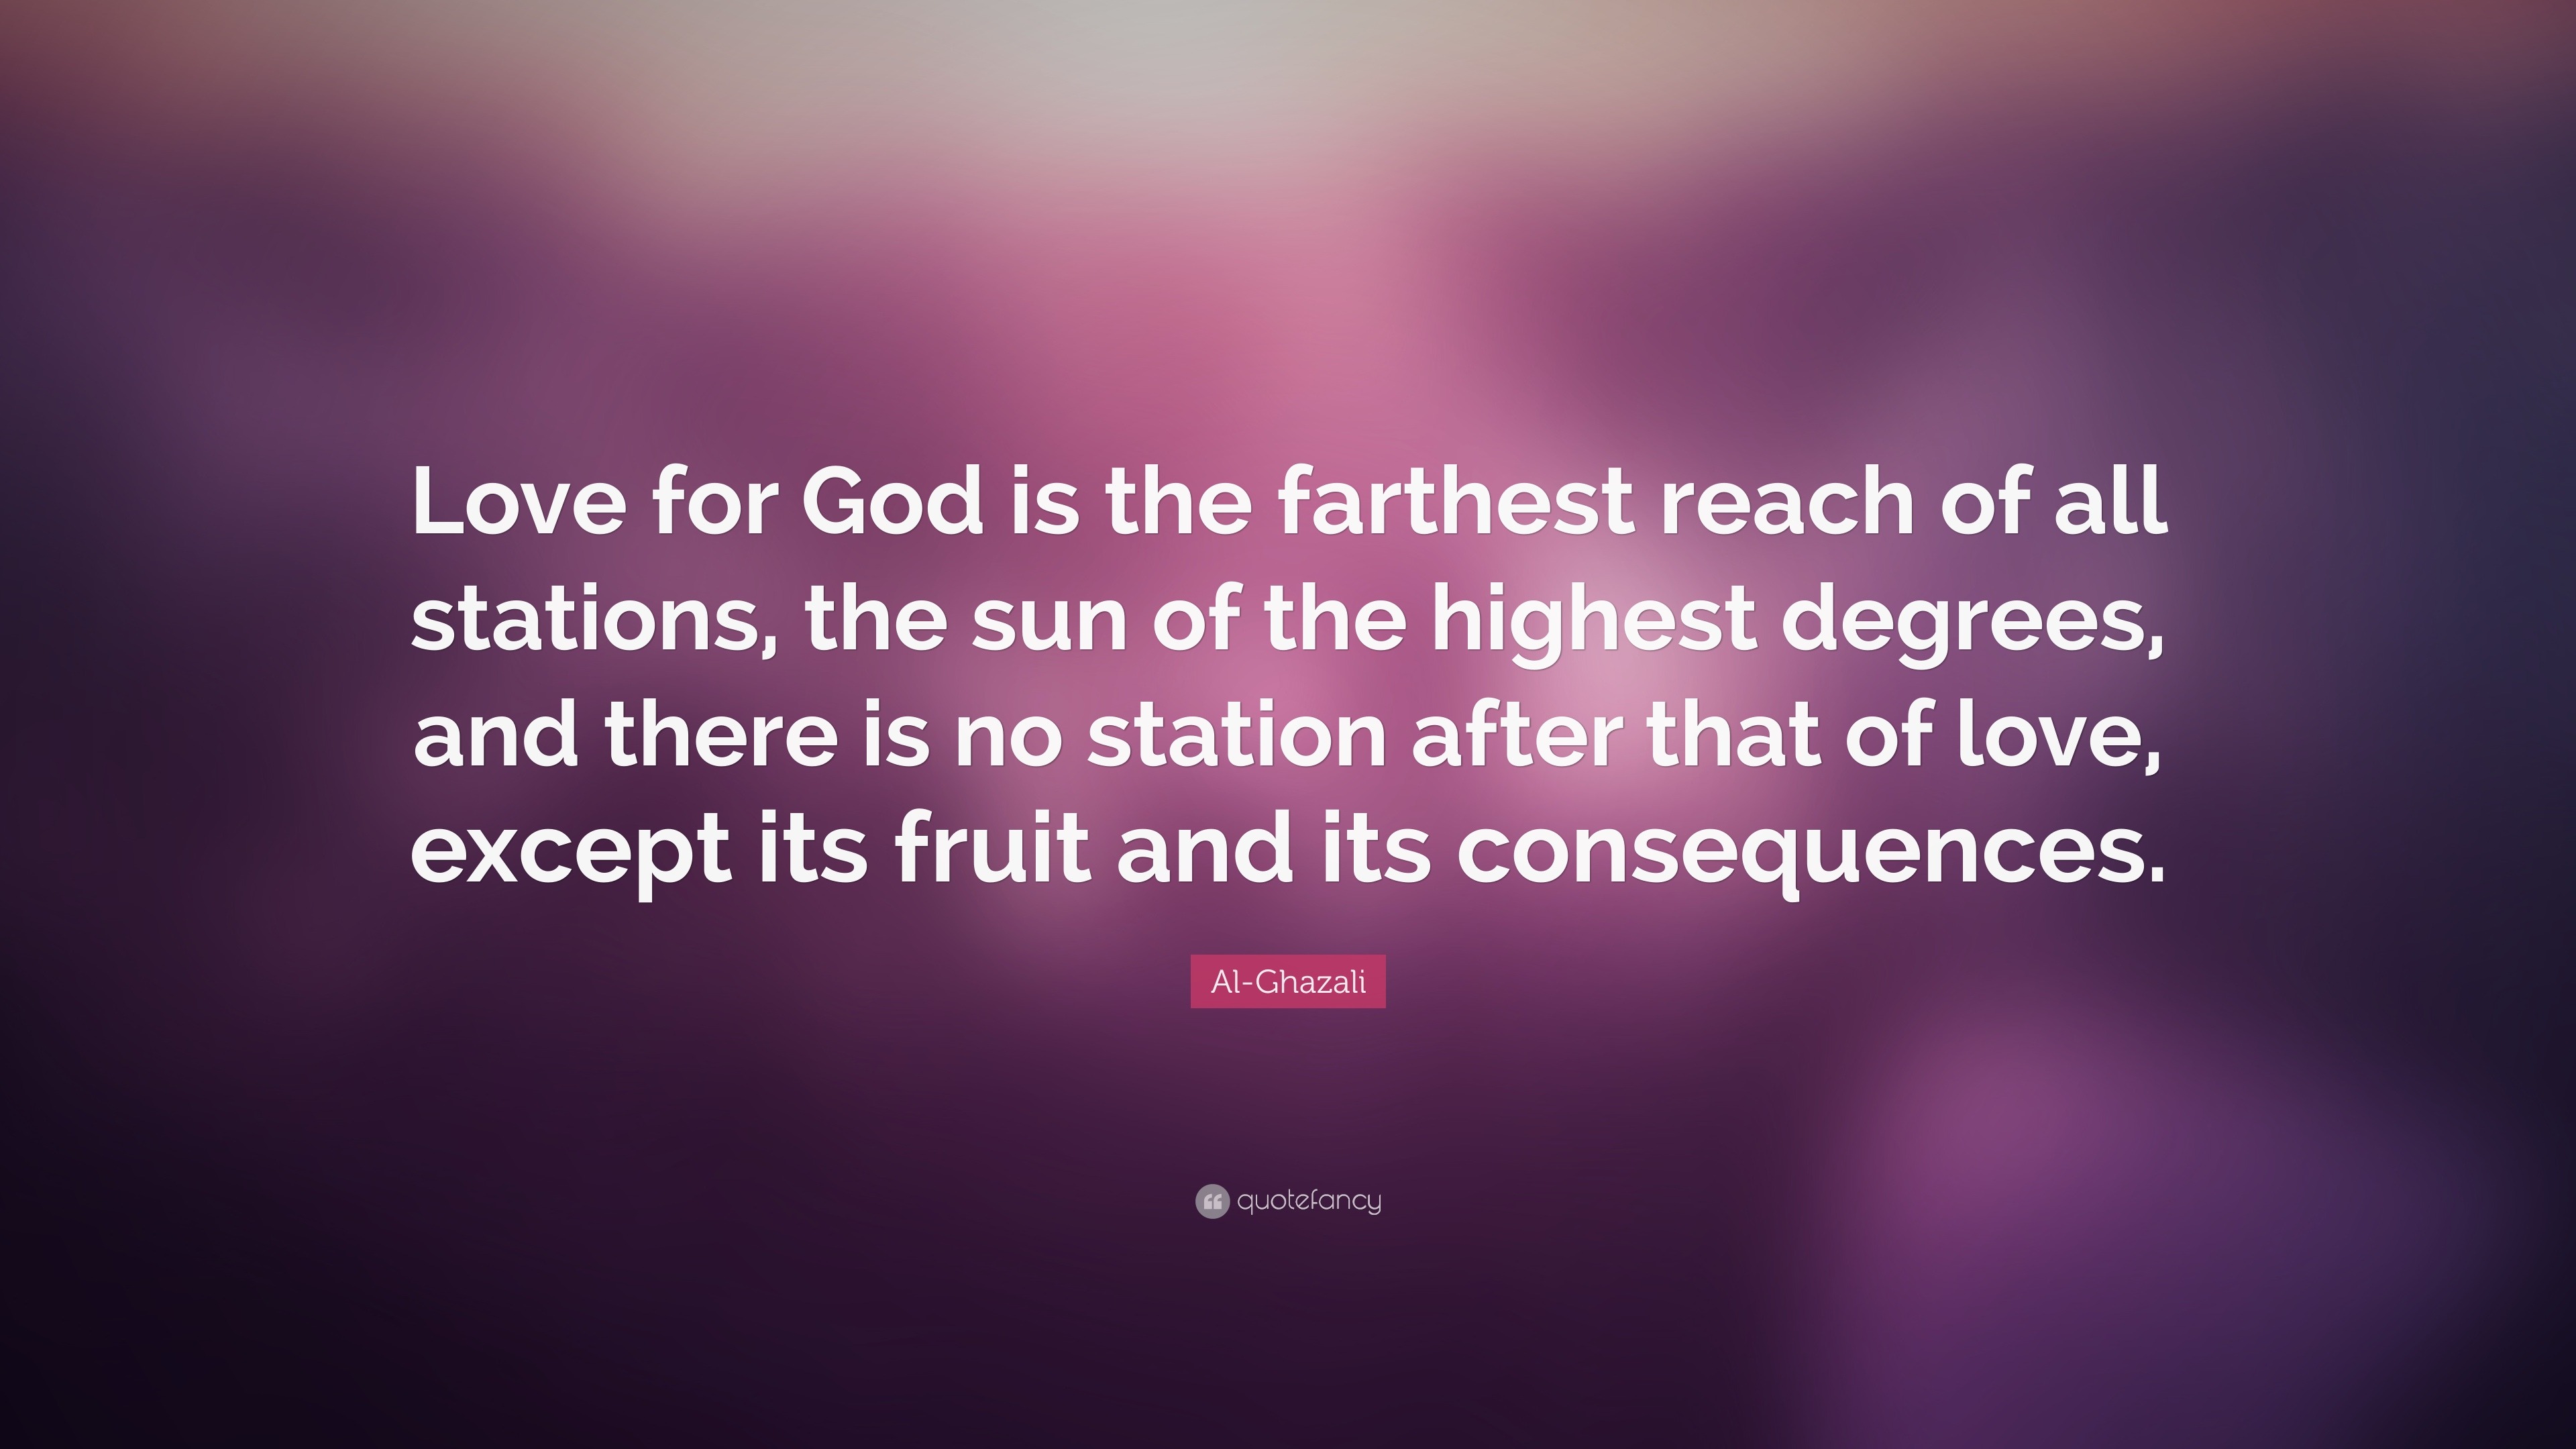 Al Ghazali Quote “Love for God is the farthest reach of all stations